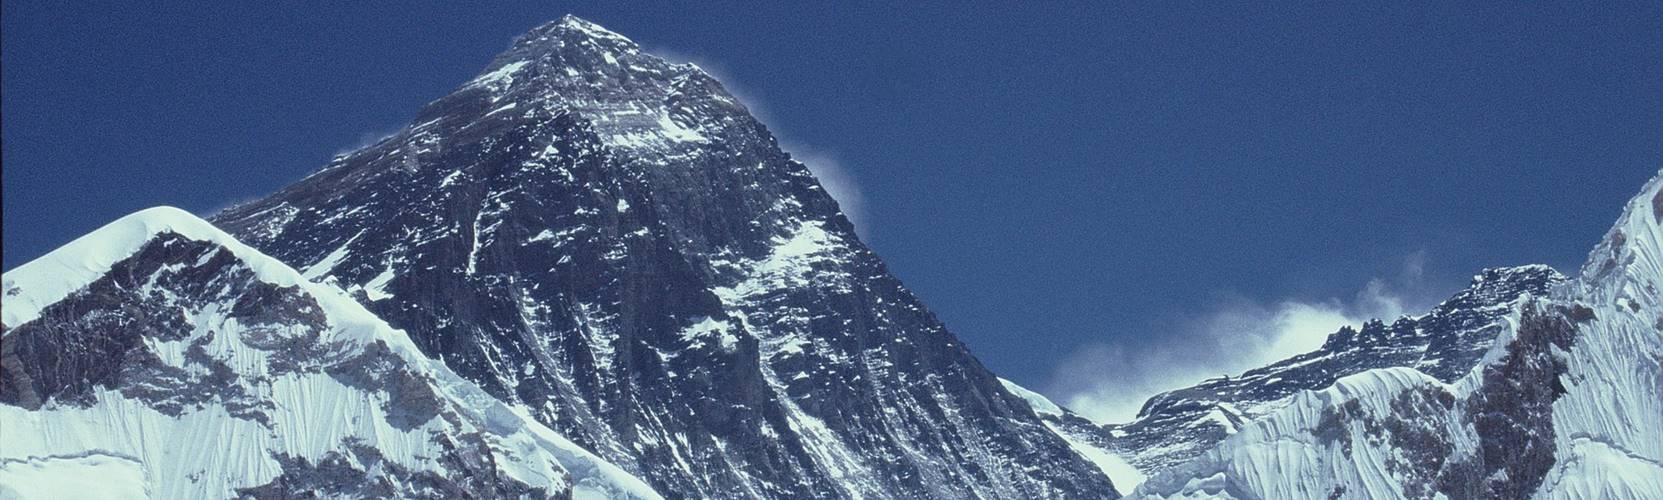 how-much-does-it-cost-to-climb-mount-everest-2.jpg